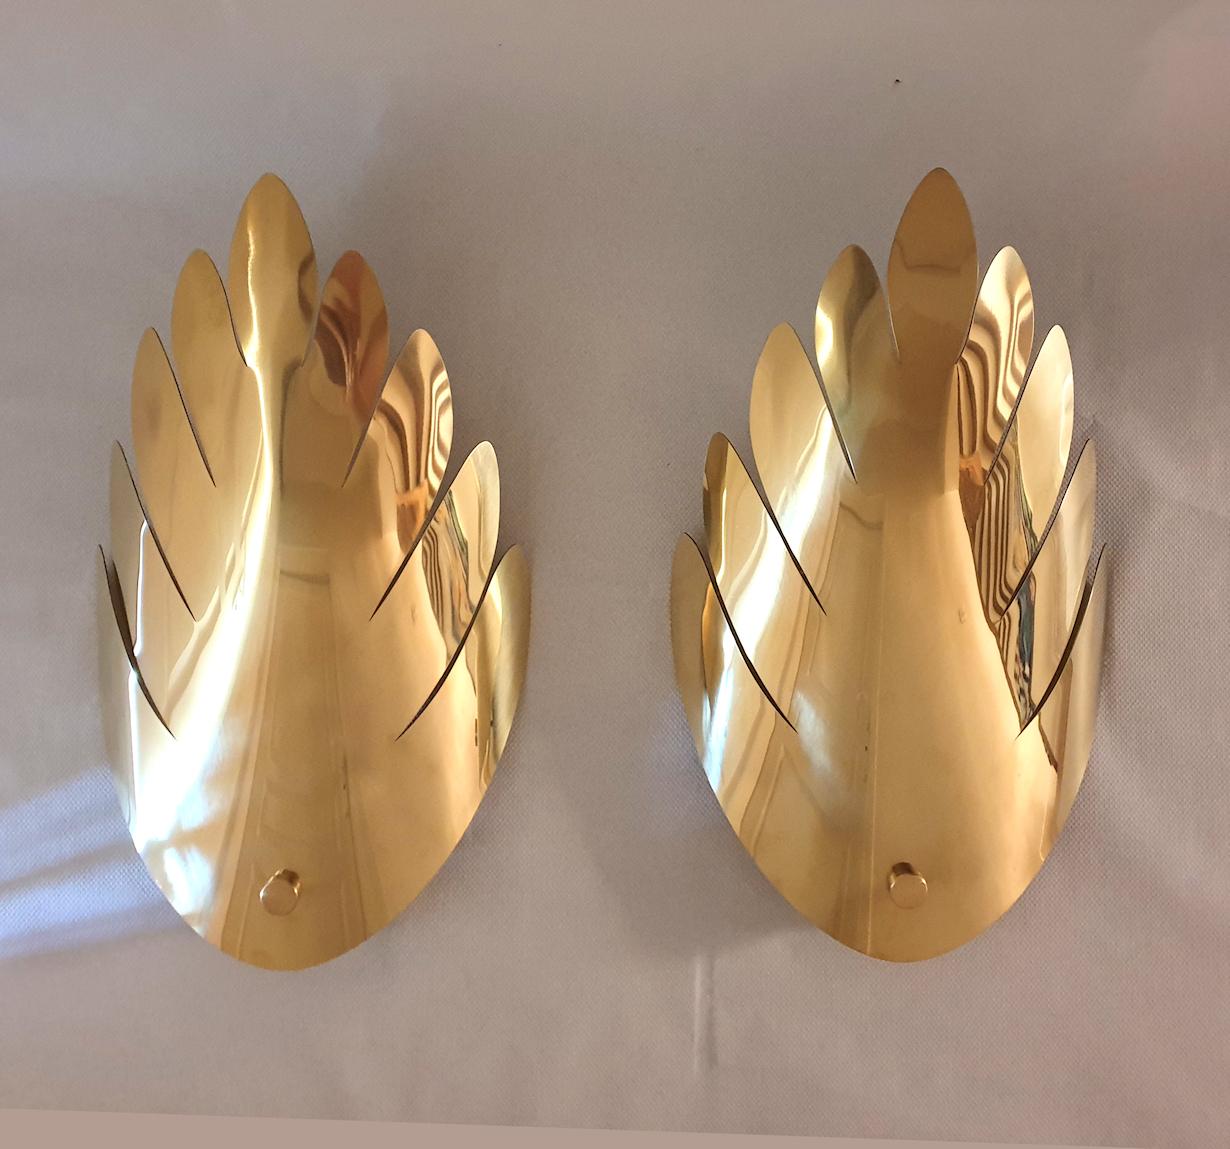 Pair of large Mid-Century Modern brass wall sconces, in the style of Maison Jansen, France, 1970s
The brass sconces have 1-light each, and are rewired for the US.
The French sconces are made of a brass stylized curved leaf and brass mounts.
In